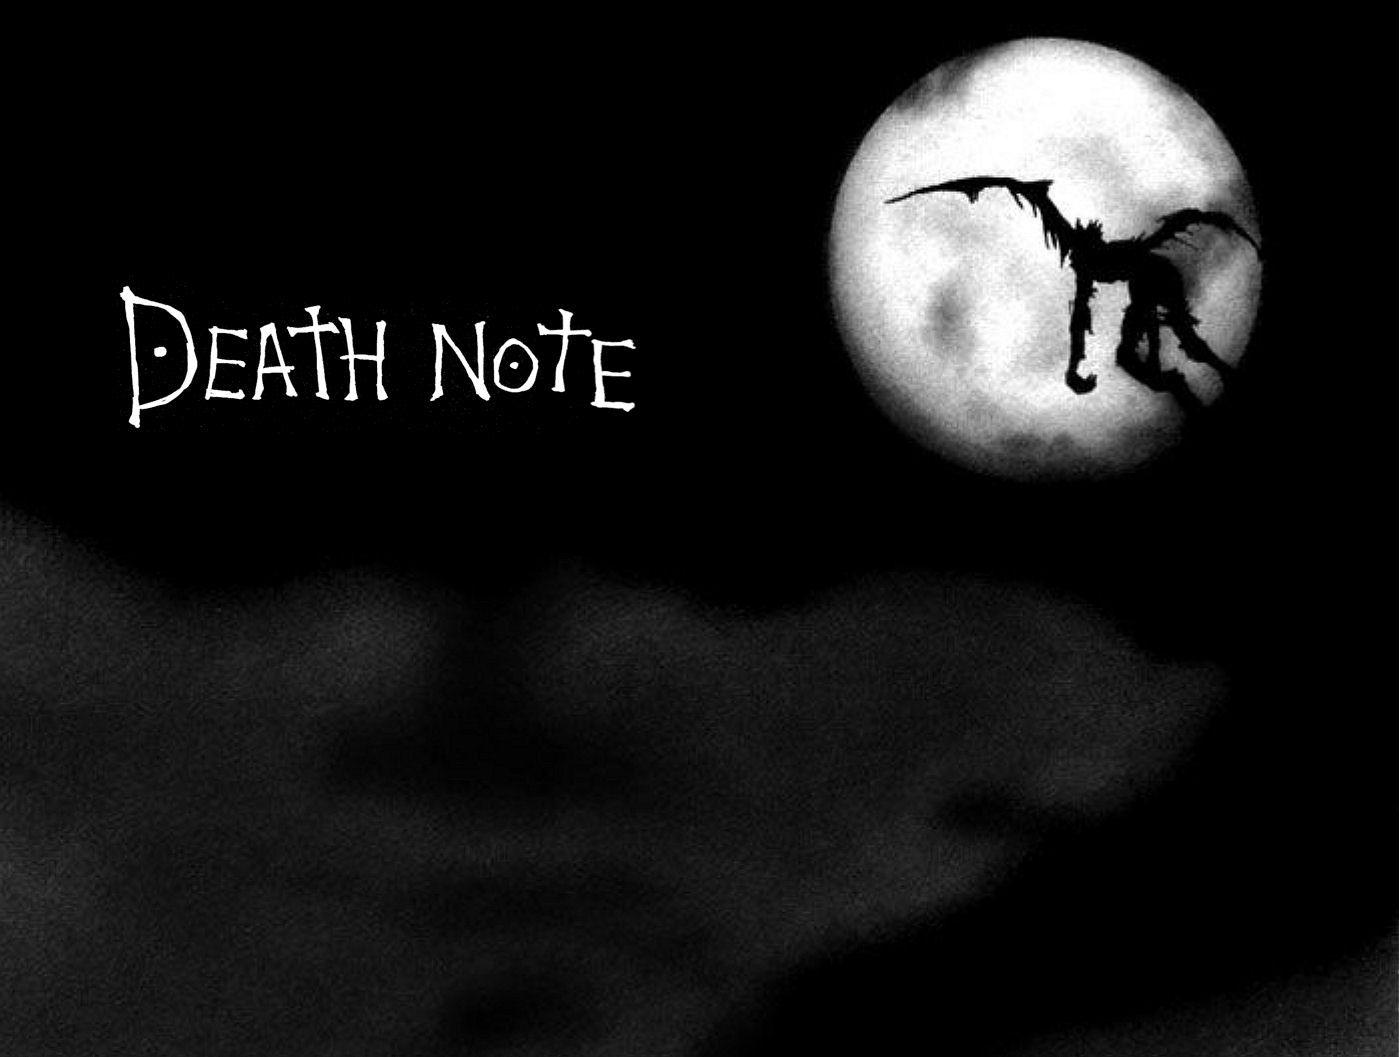 Amazing death note wallpaper full HD In Top Wallpaper HD with death